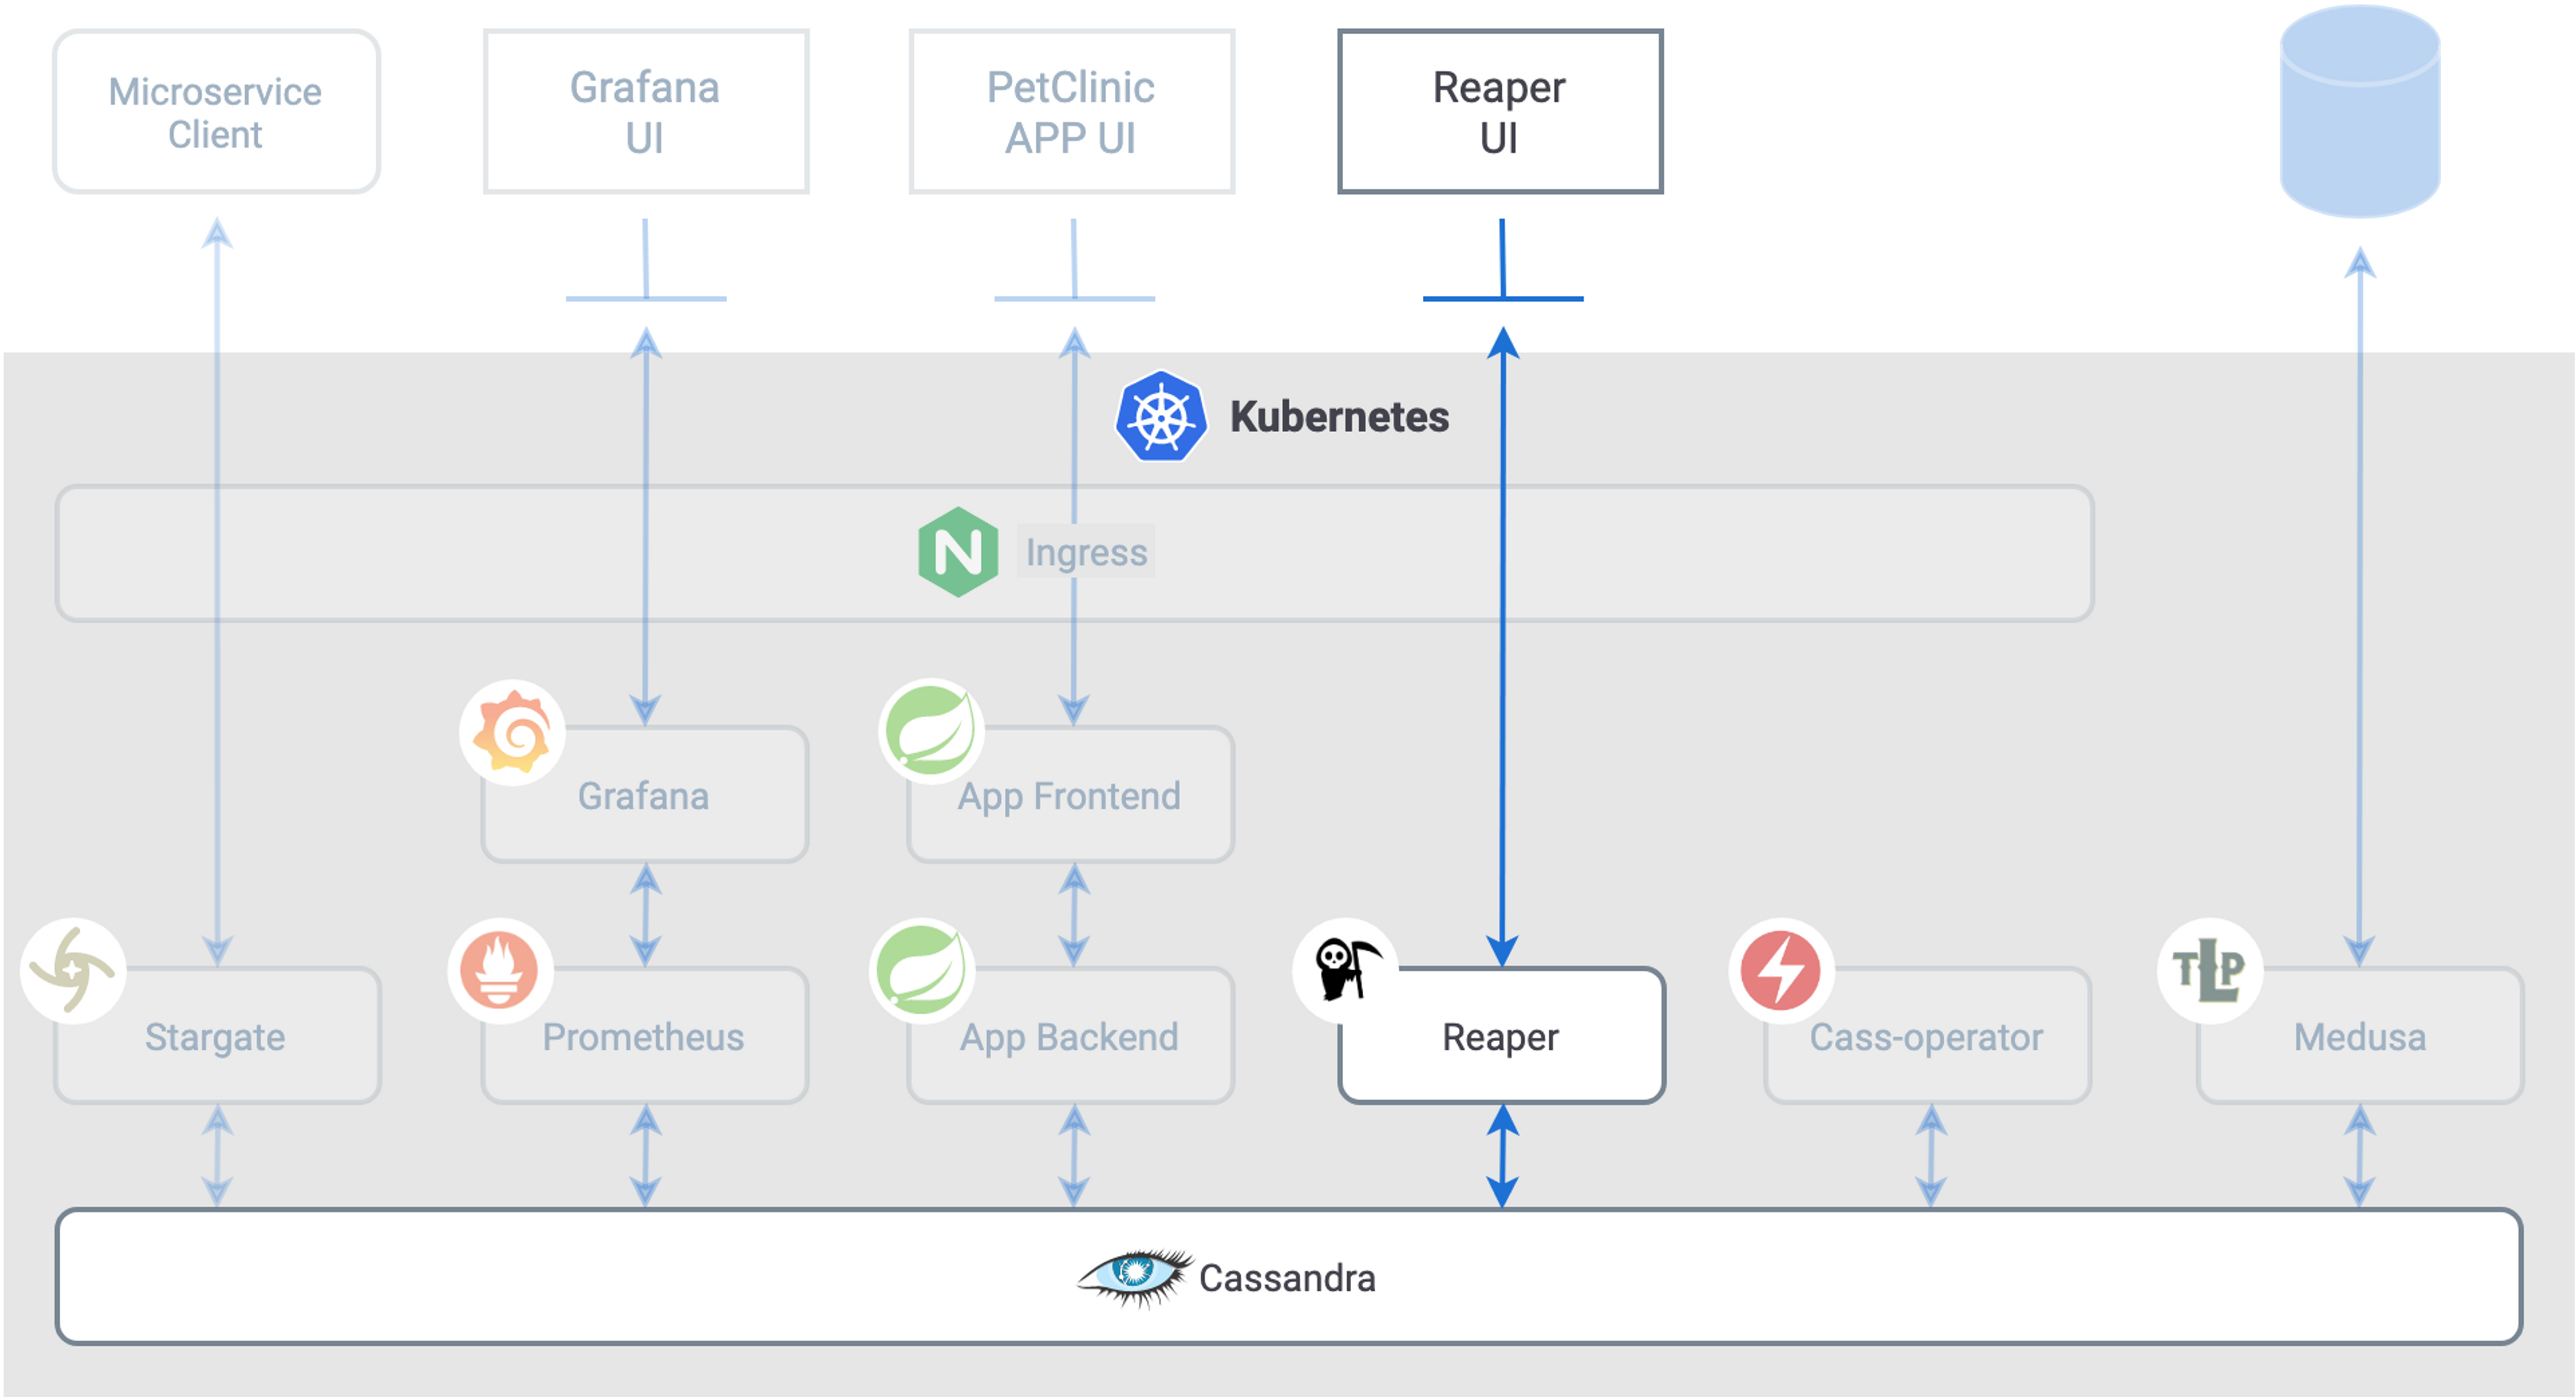 What Is Cassandra Repair And How Does It Work In Kubernetes?